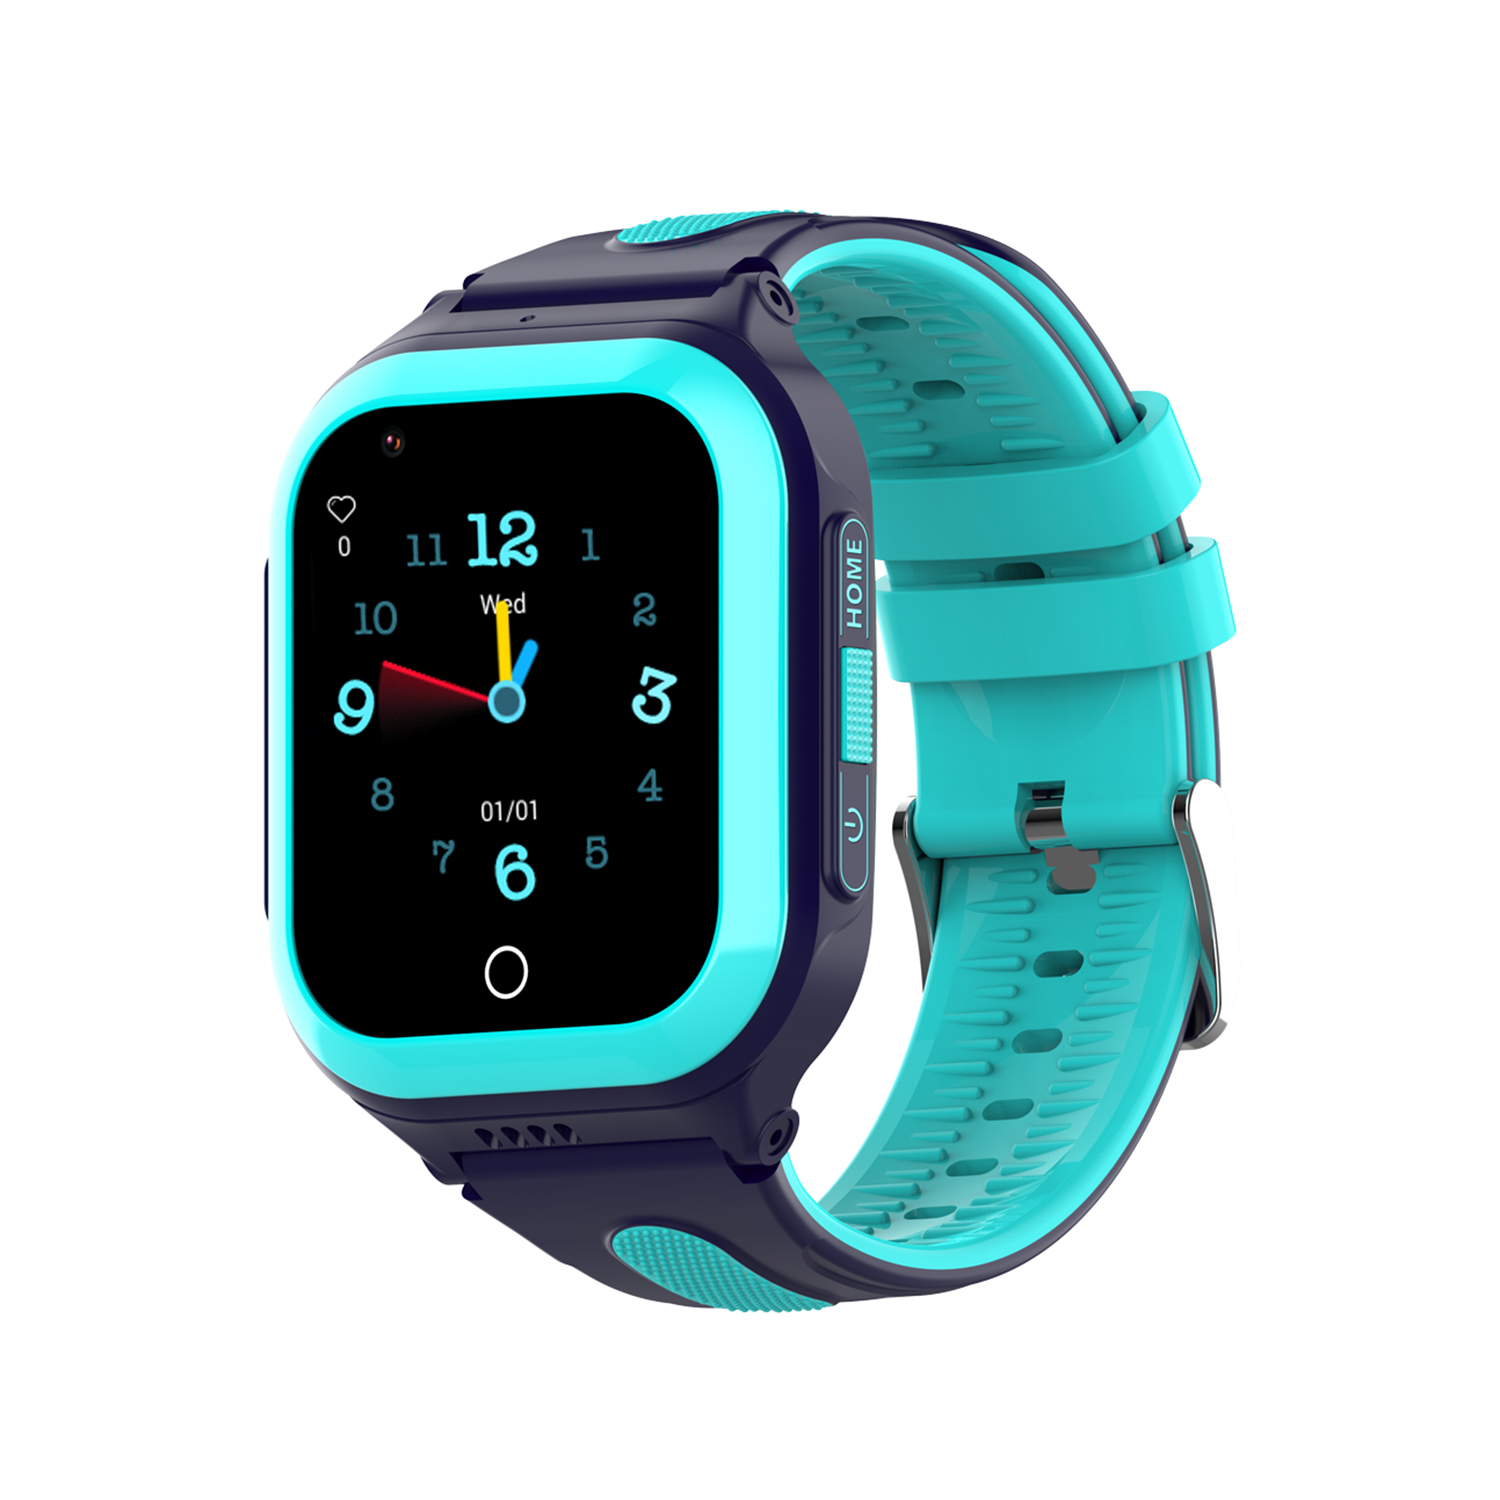 Best Quality 4G IP67 Waterproof Gift Watch Kids Personal Security GPS Tracker with HD camera for remote snapshot video call Y45